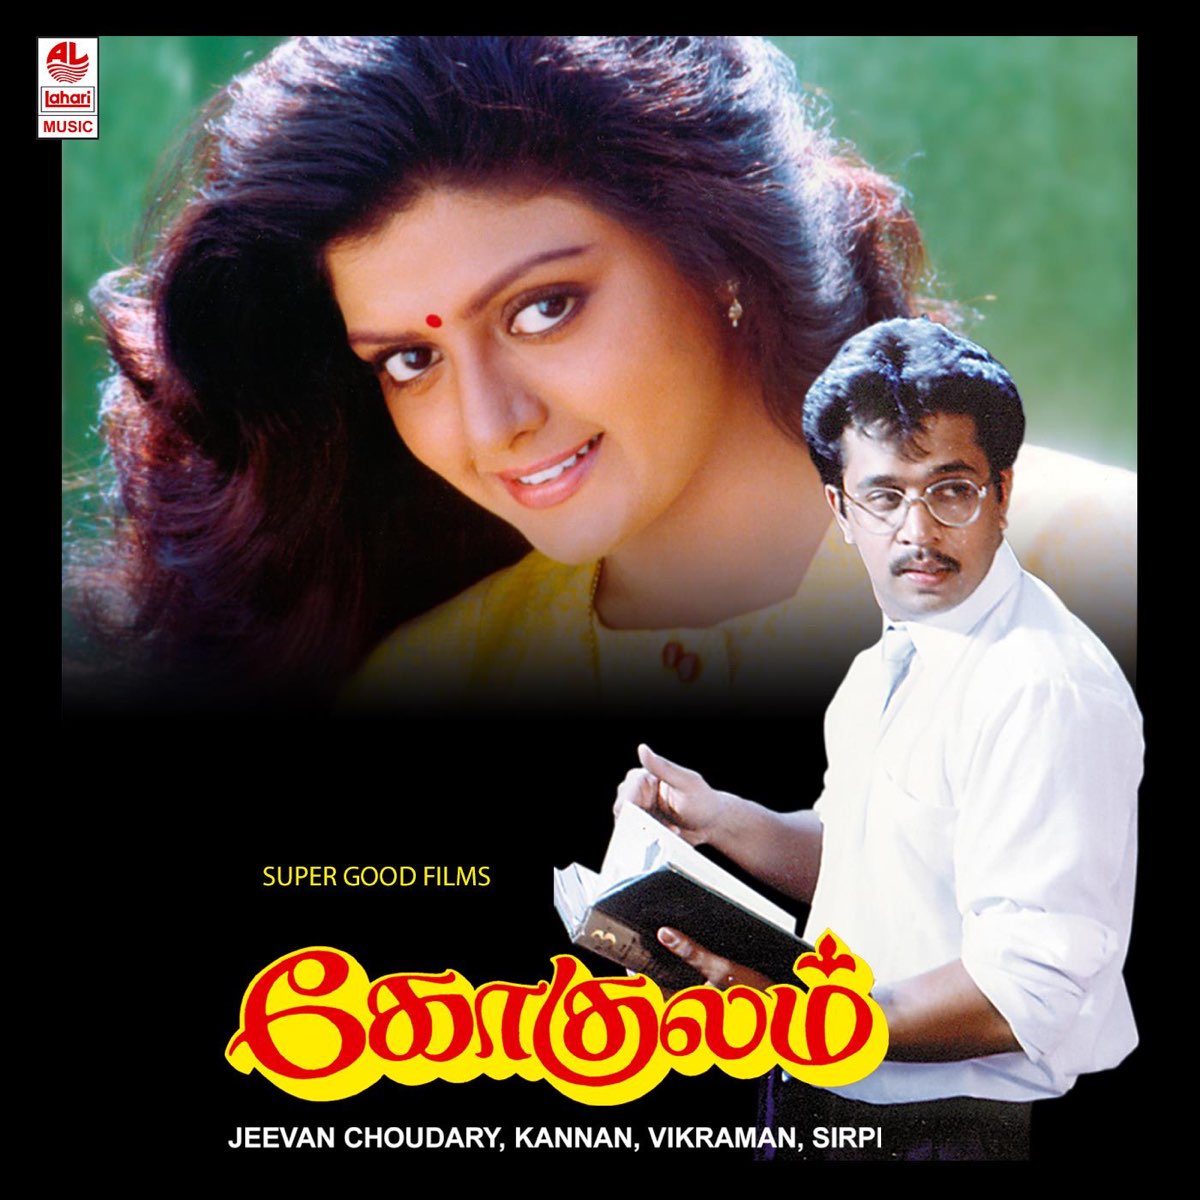 Gokulam (Original Motion Picture Soundtrack) by Sirpy on Apple Music